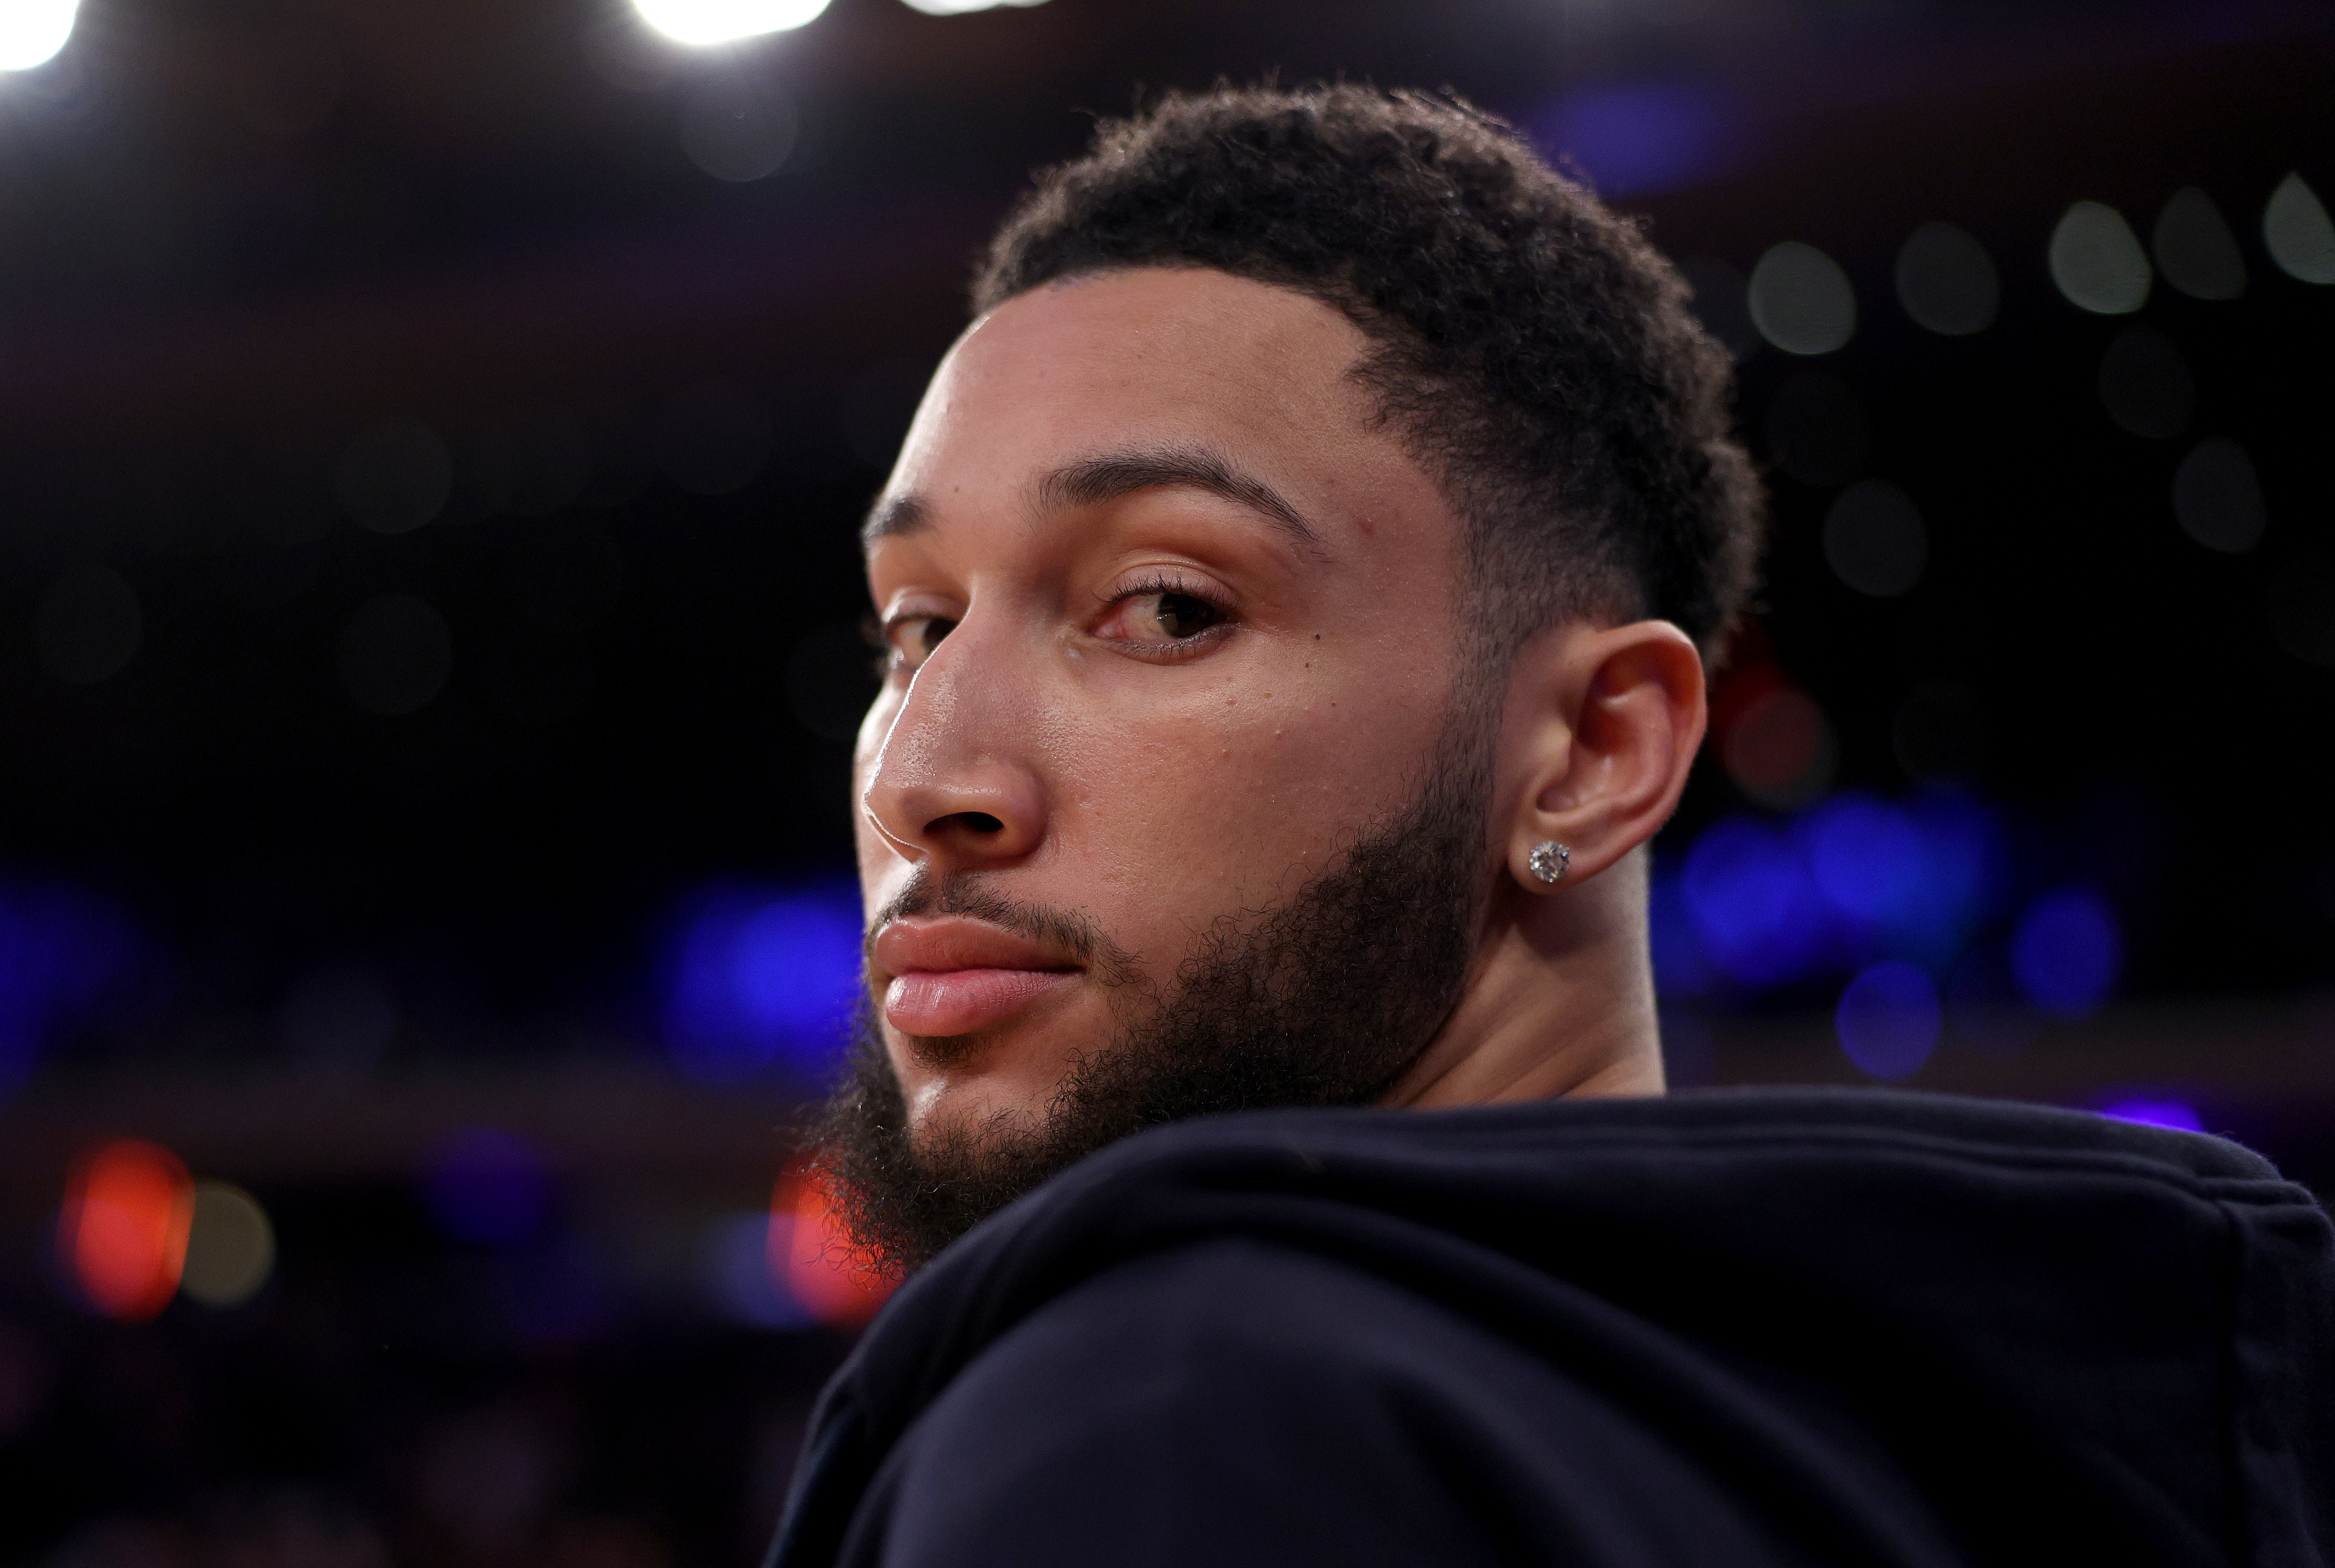 Ben Simmons will not play again this season